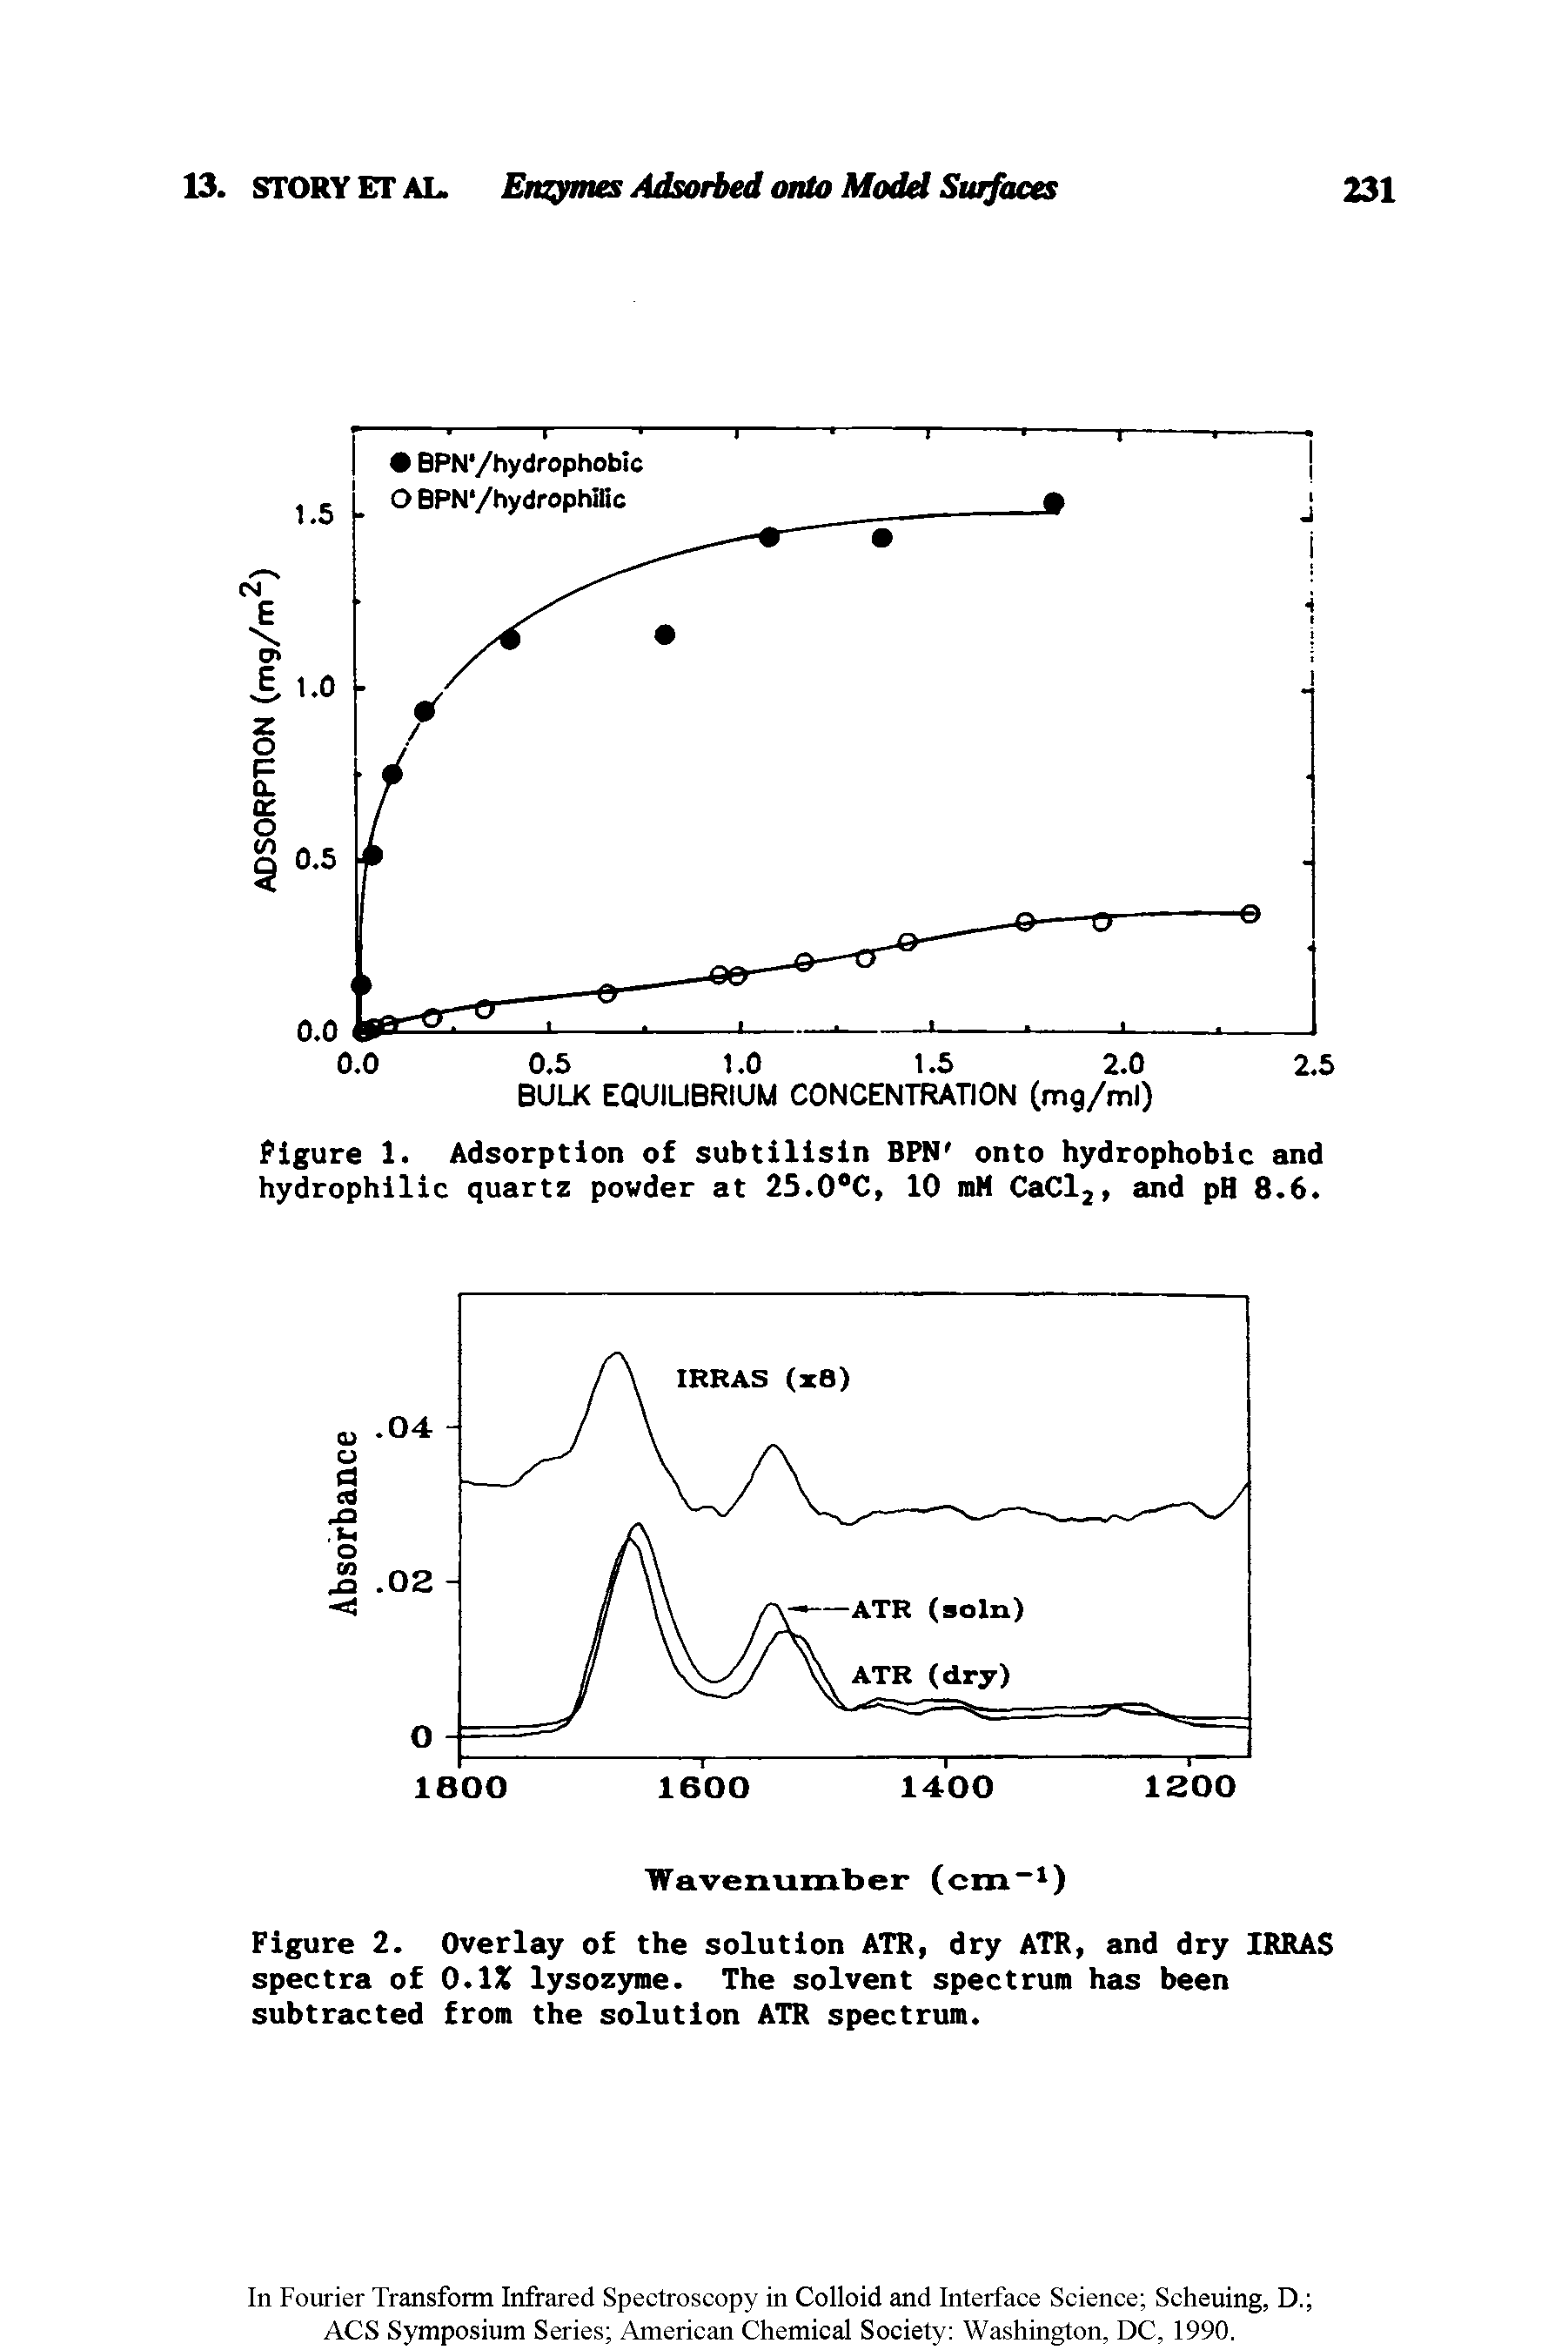 Figure 2. Overlay of the solution ATR, dry ATR, and dry IRRAS spectra of 0.12 lysozyme. The solvent spectrum has been subtracted from the solution ATR spectrum.